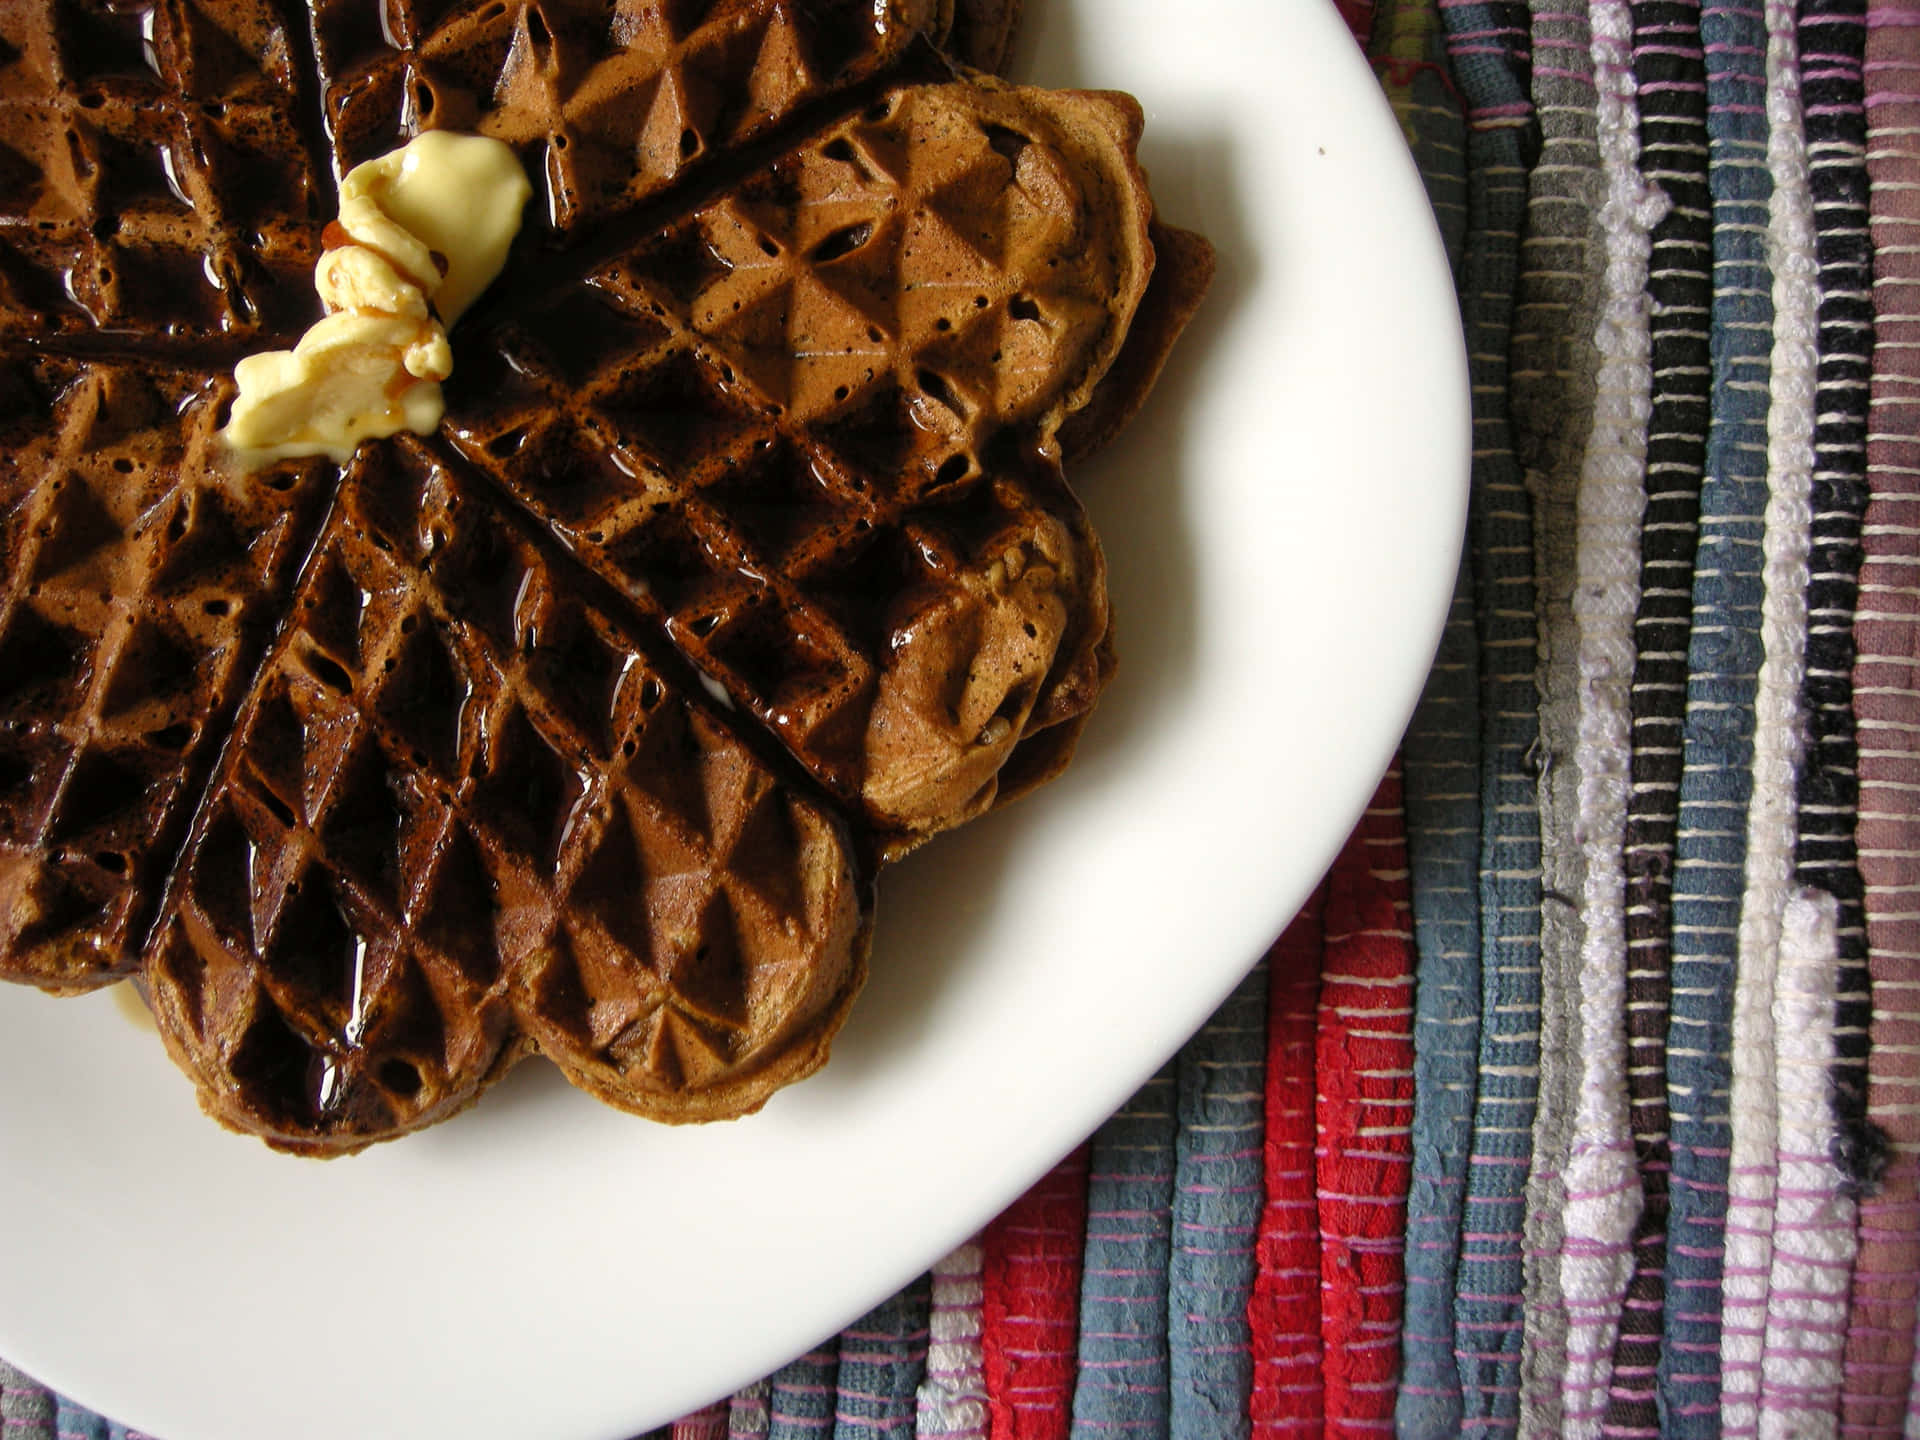 Delicious Golden Waffles Stacked and Ready to Eat